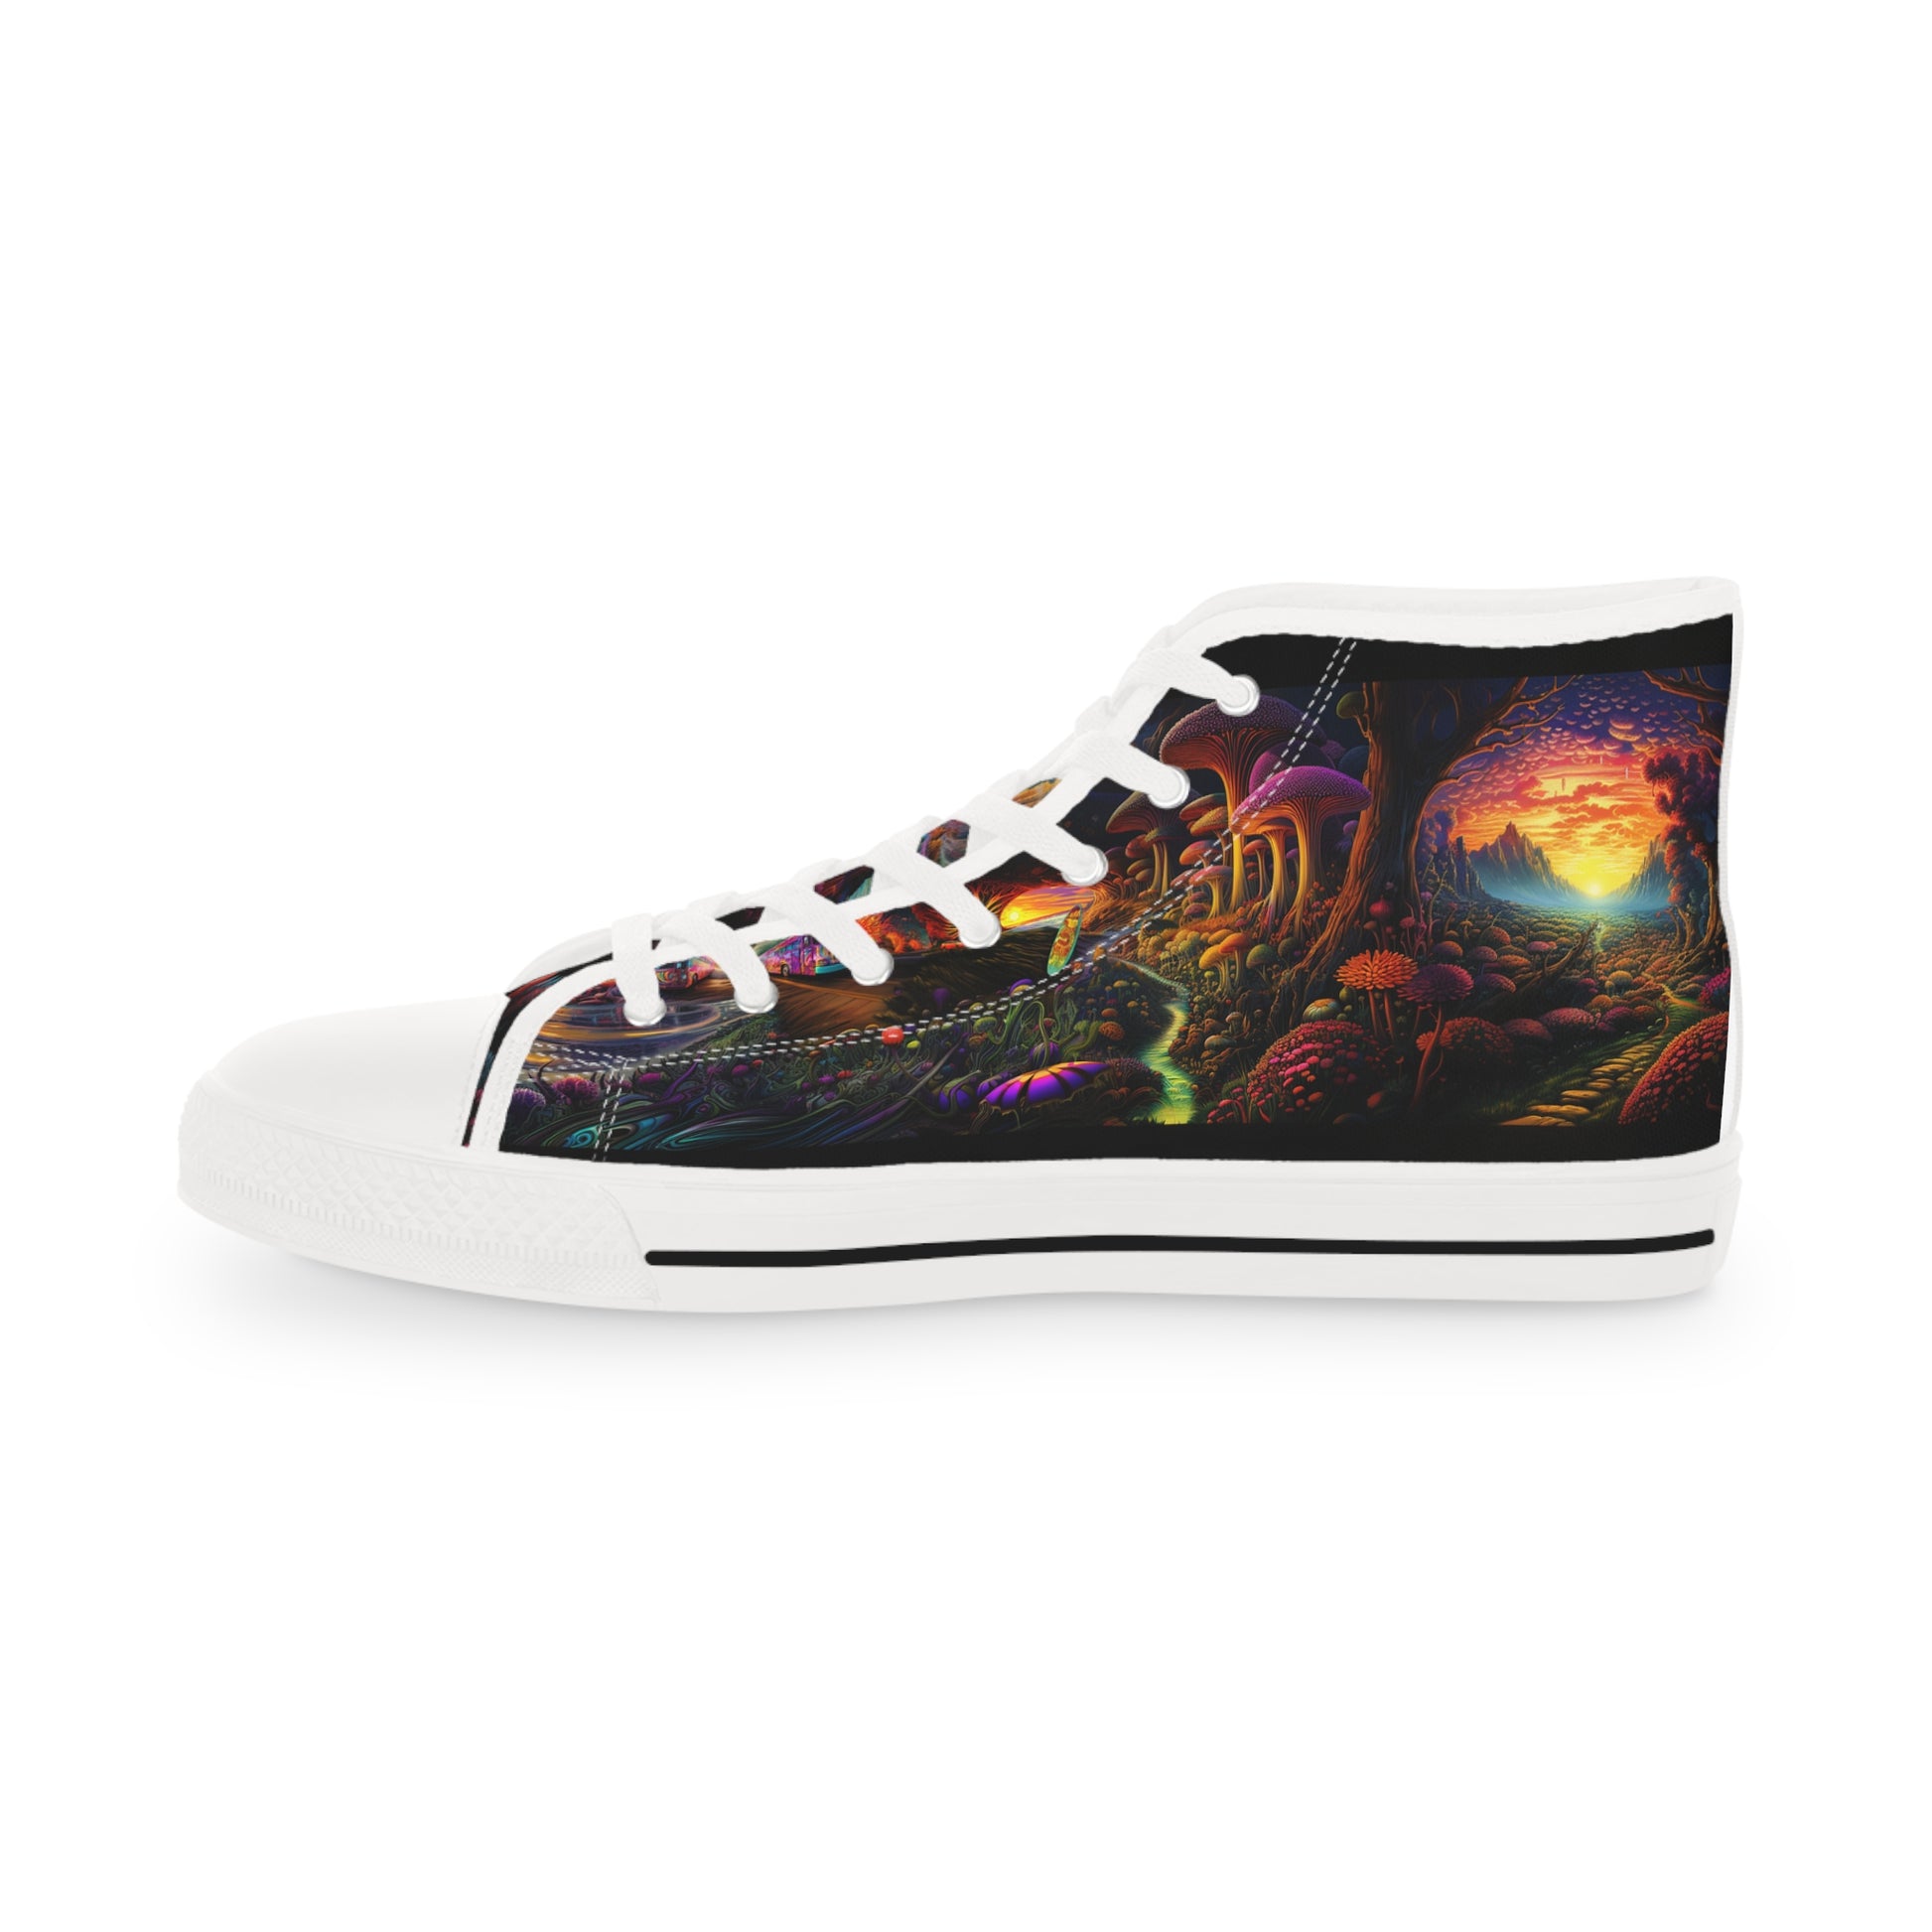 Walk on the Wild Side with our Psychedelic High Top Sneakers #001. Where fashion meets the cosmos, exclusively at Stashbox.ai.